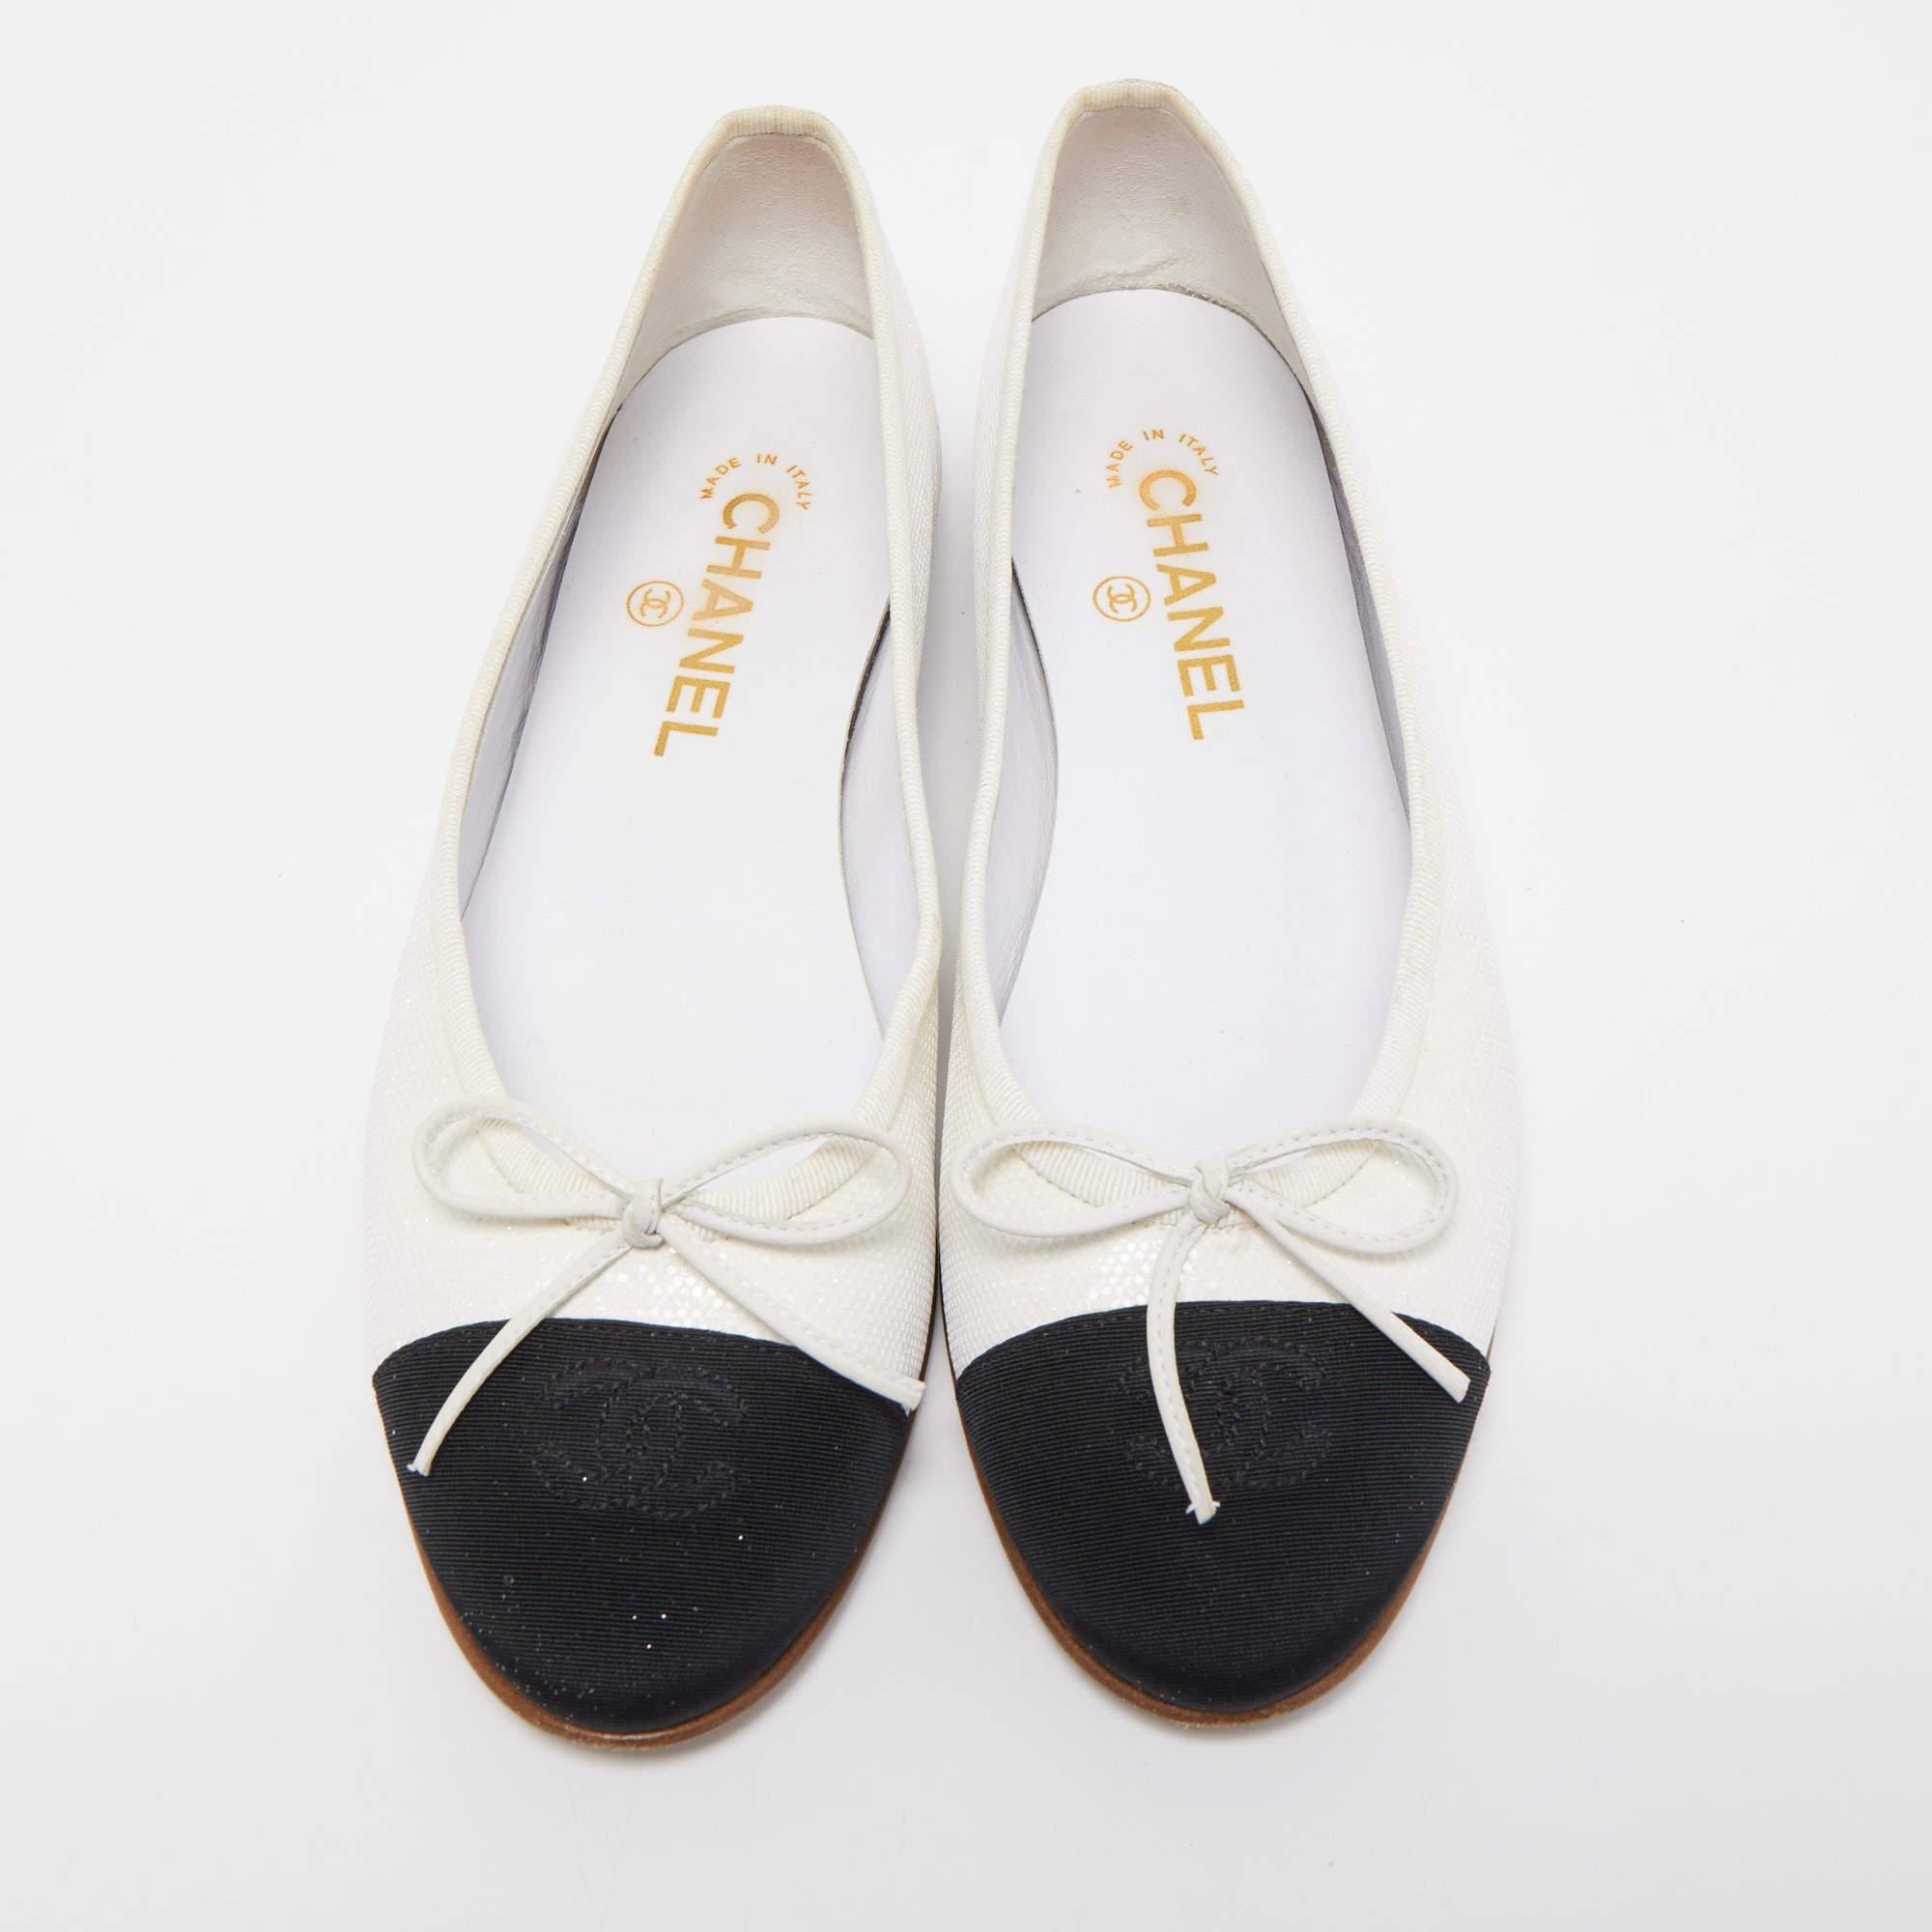 How chic are these ballet flats from the House of Chanel! They are made from black-white glitter suede and leather on the exterior, with a CC bow motif detailing the toes. They showcase a slip-on feature. These Chanel ballet flats are the best pick